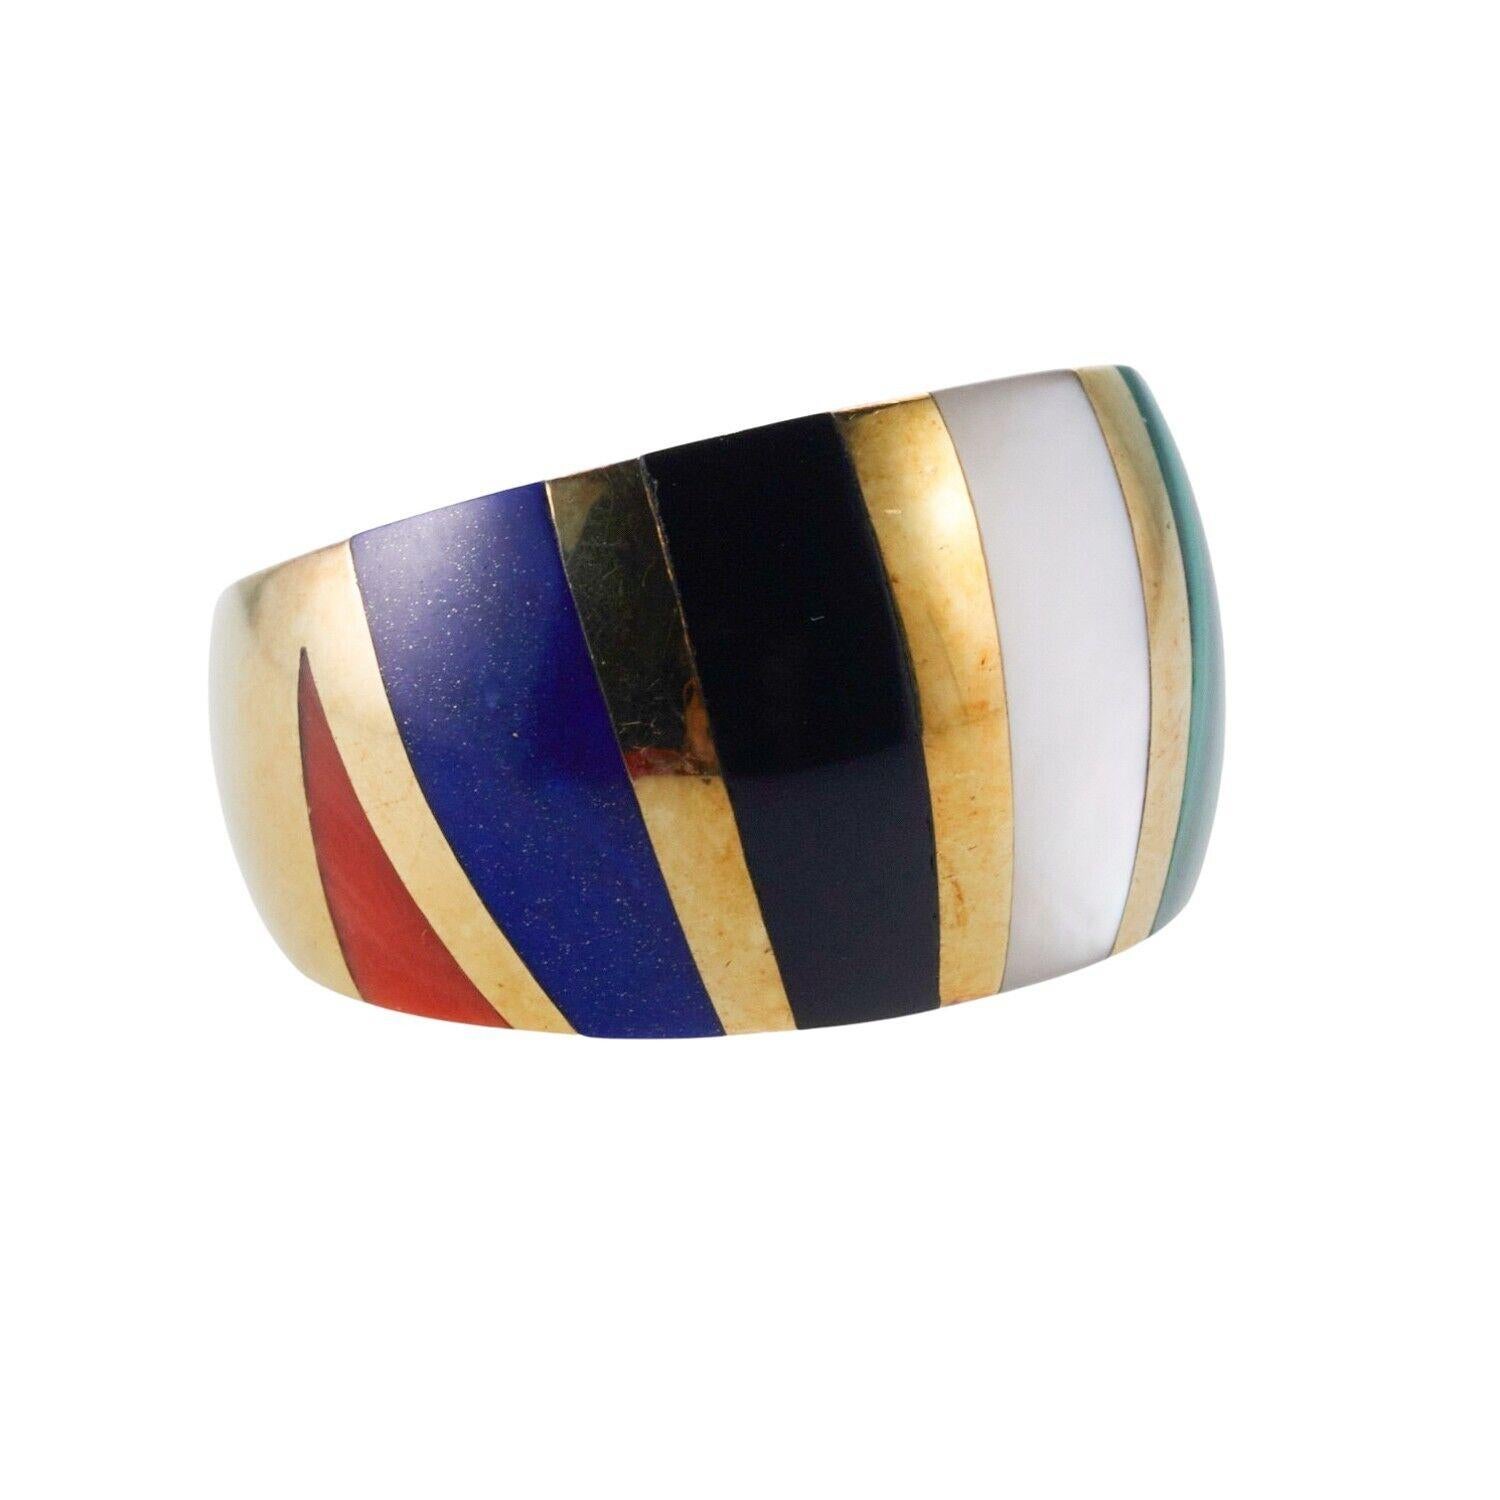 Asch Grossbardt MOP Onyx Coral Malachite Lapis Inlay Gold Ring In Good Condition For Sale In Lambertville, NJ